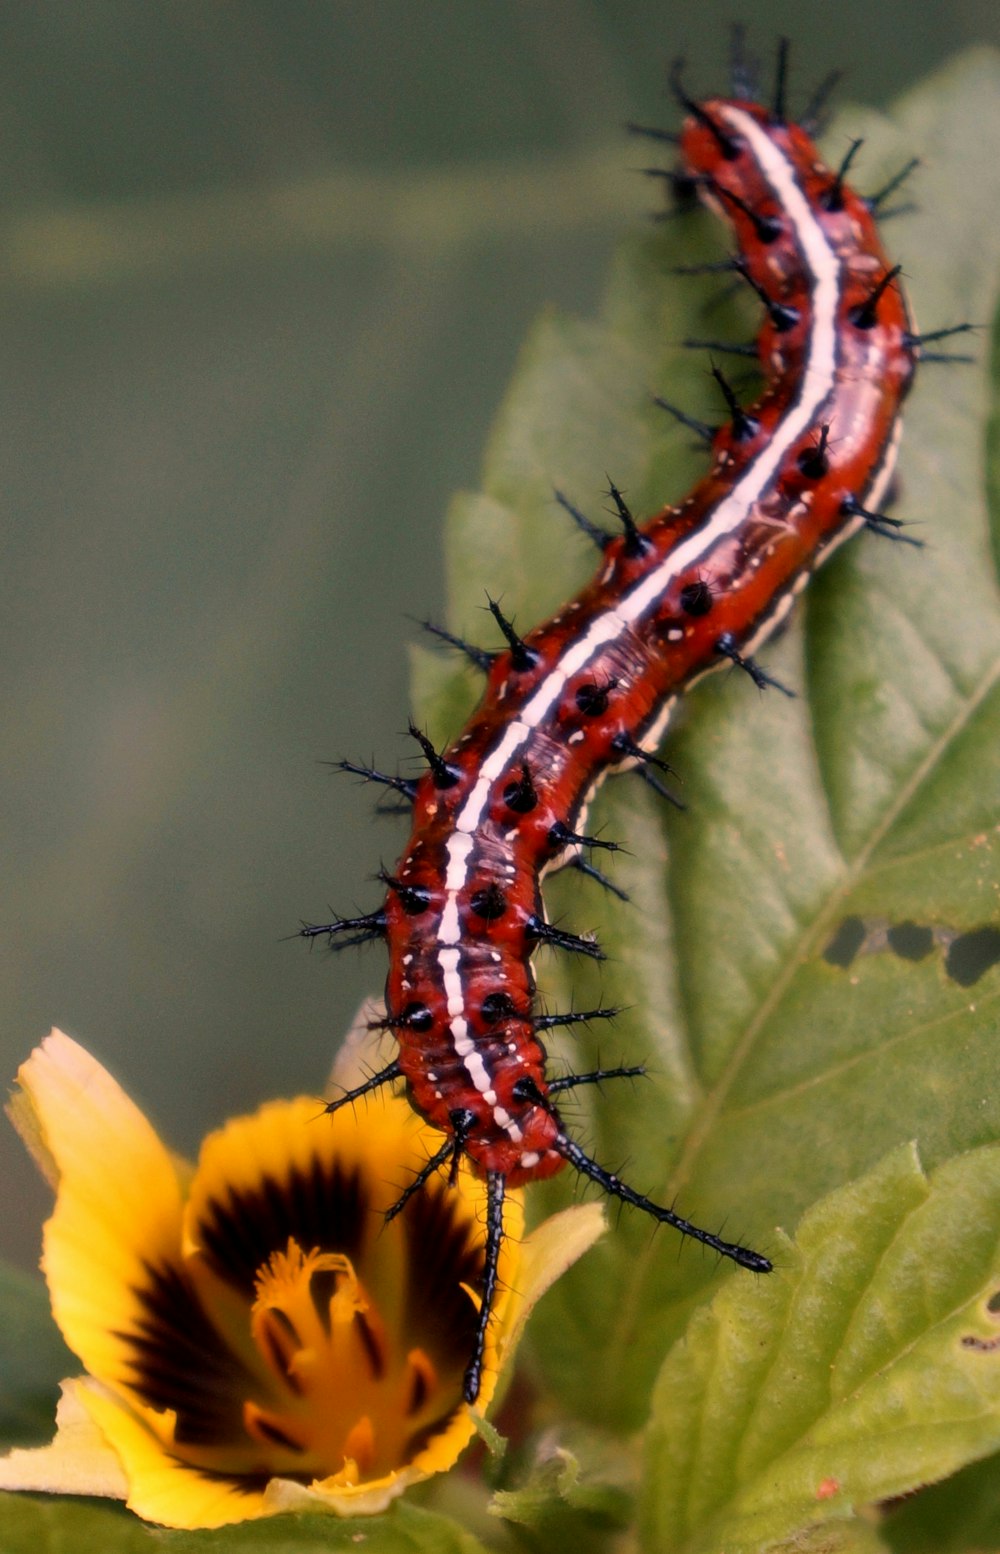 a red and black caterpillar on a yellow flower